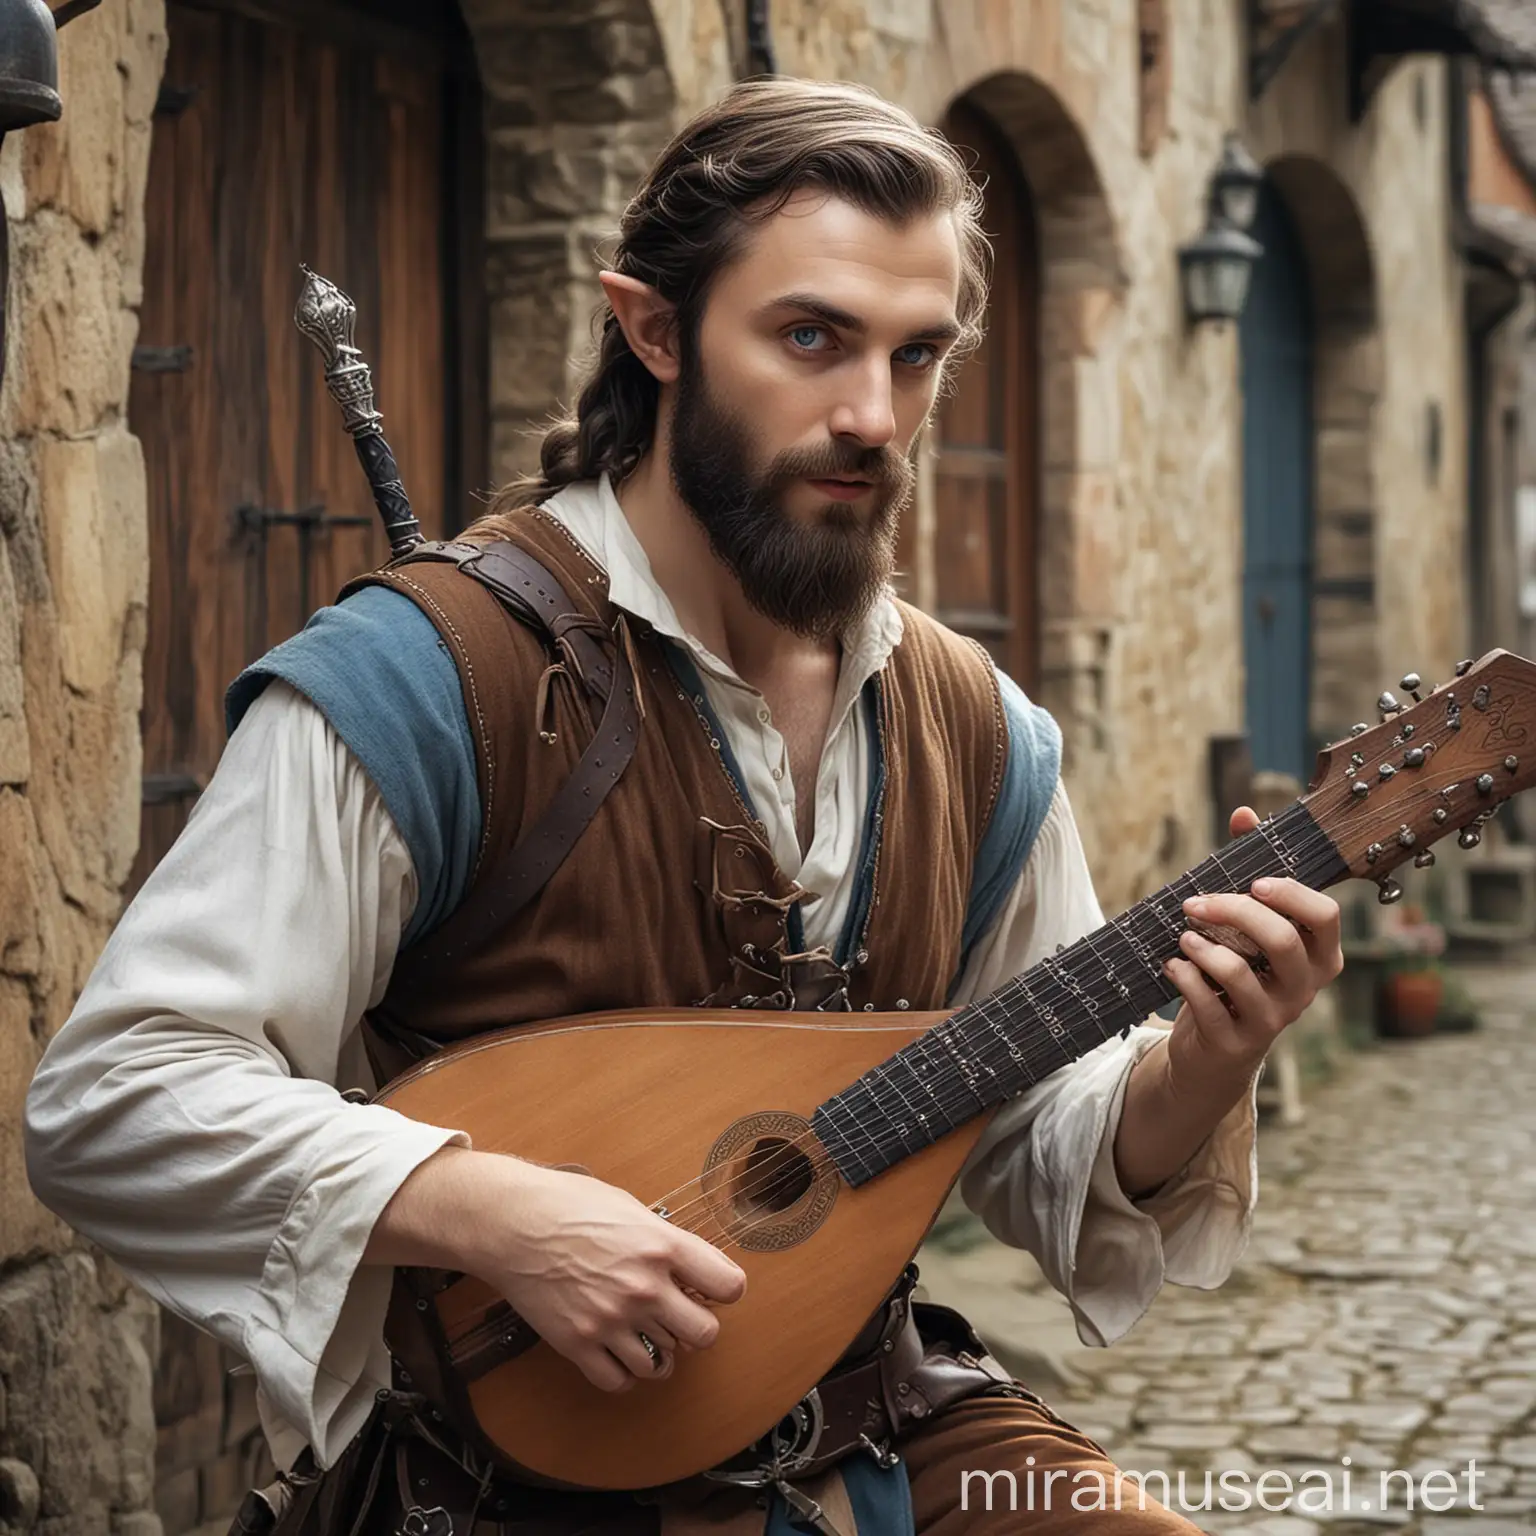 fantasy, blue eyed bearded half elf bard, playing a lute in medieval village, wearing a poniard dagger on waistbelt

